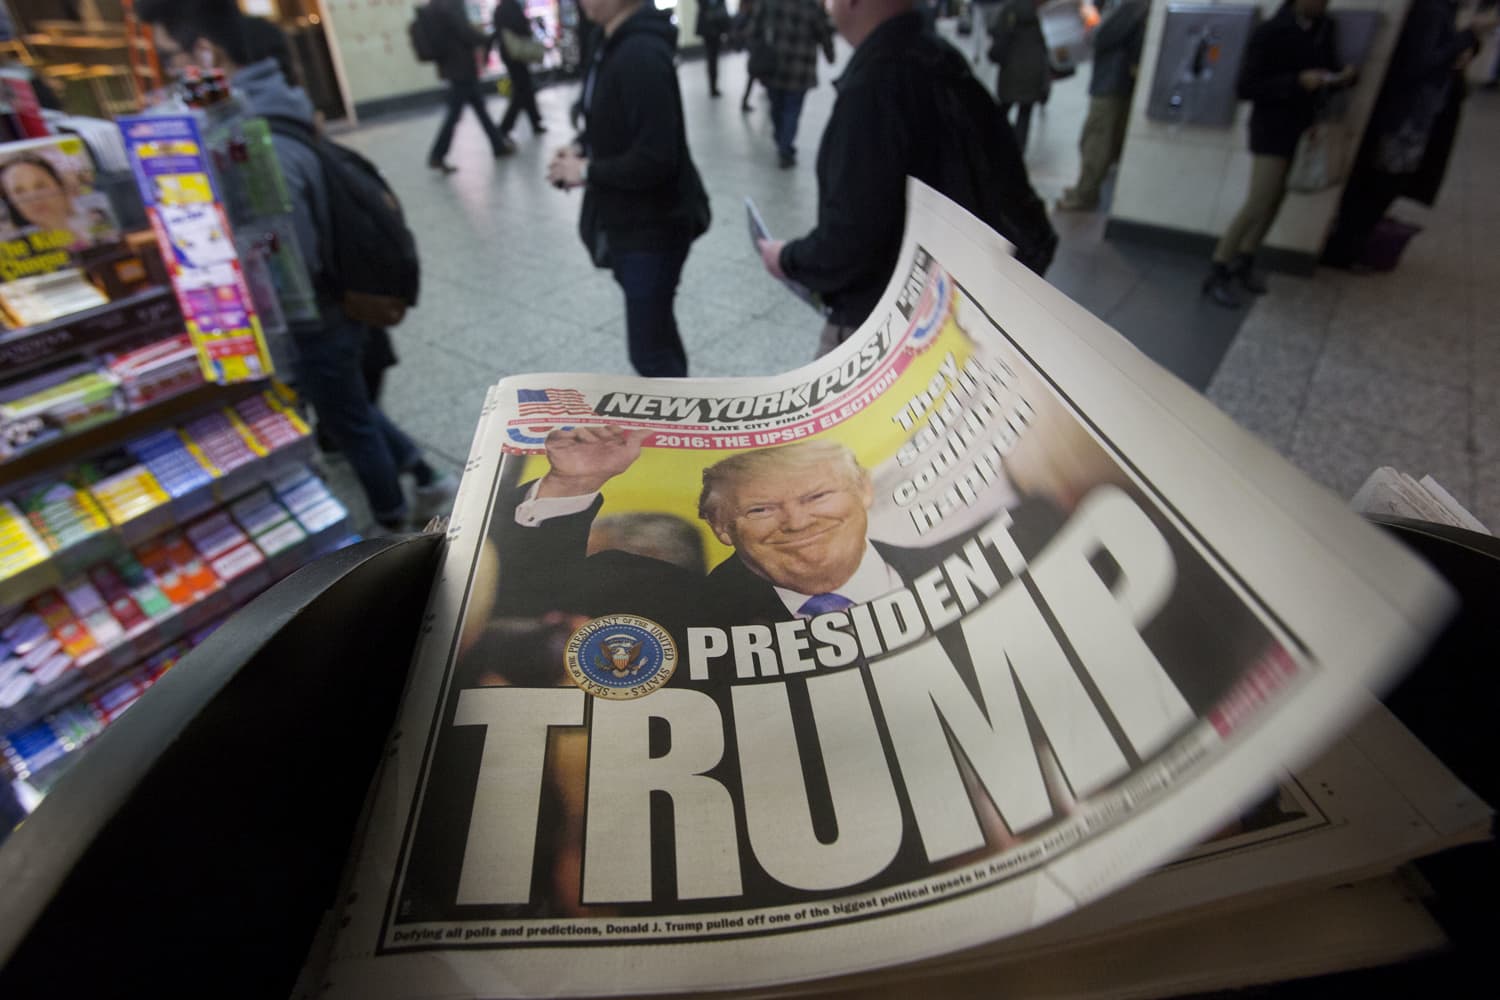 The New York Post newspaper featuring president-elect Donald Trump's victory is displayed on a New York newsstand, Wednesday, Nov. 9, 2016 in New York. (Mark Lennihan/AP)